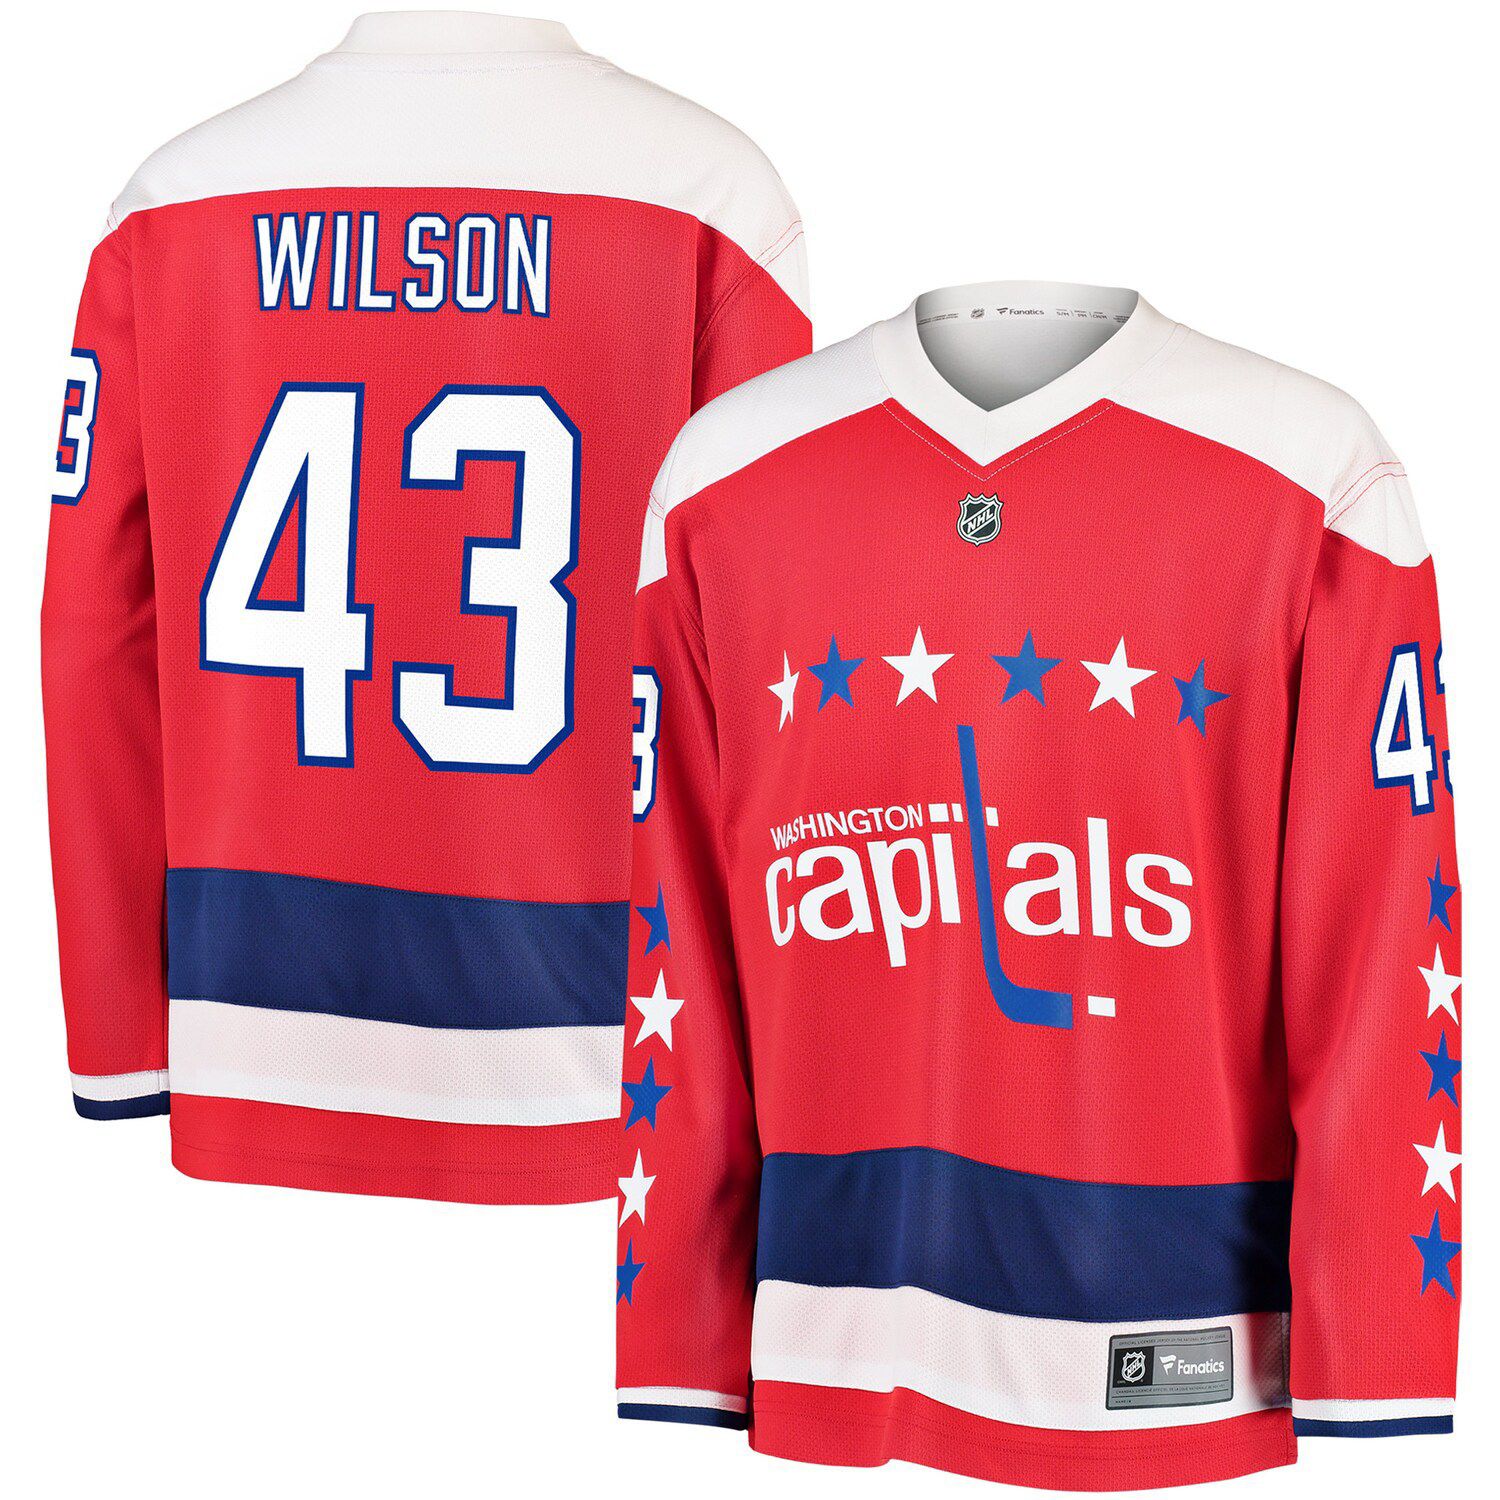 tom wilson youth jersey